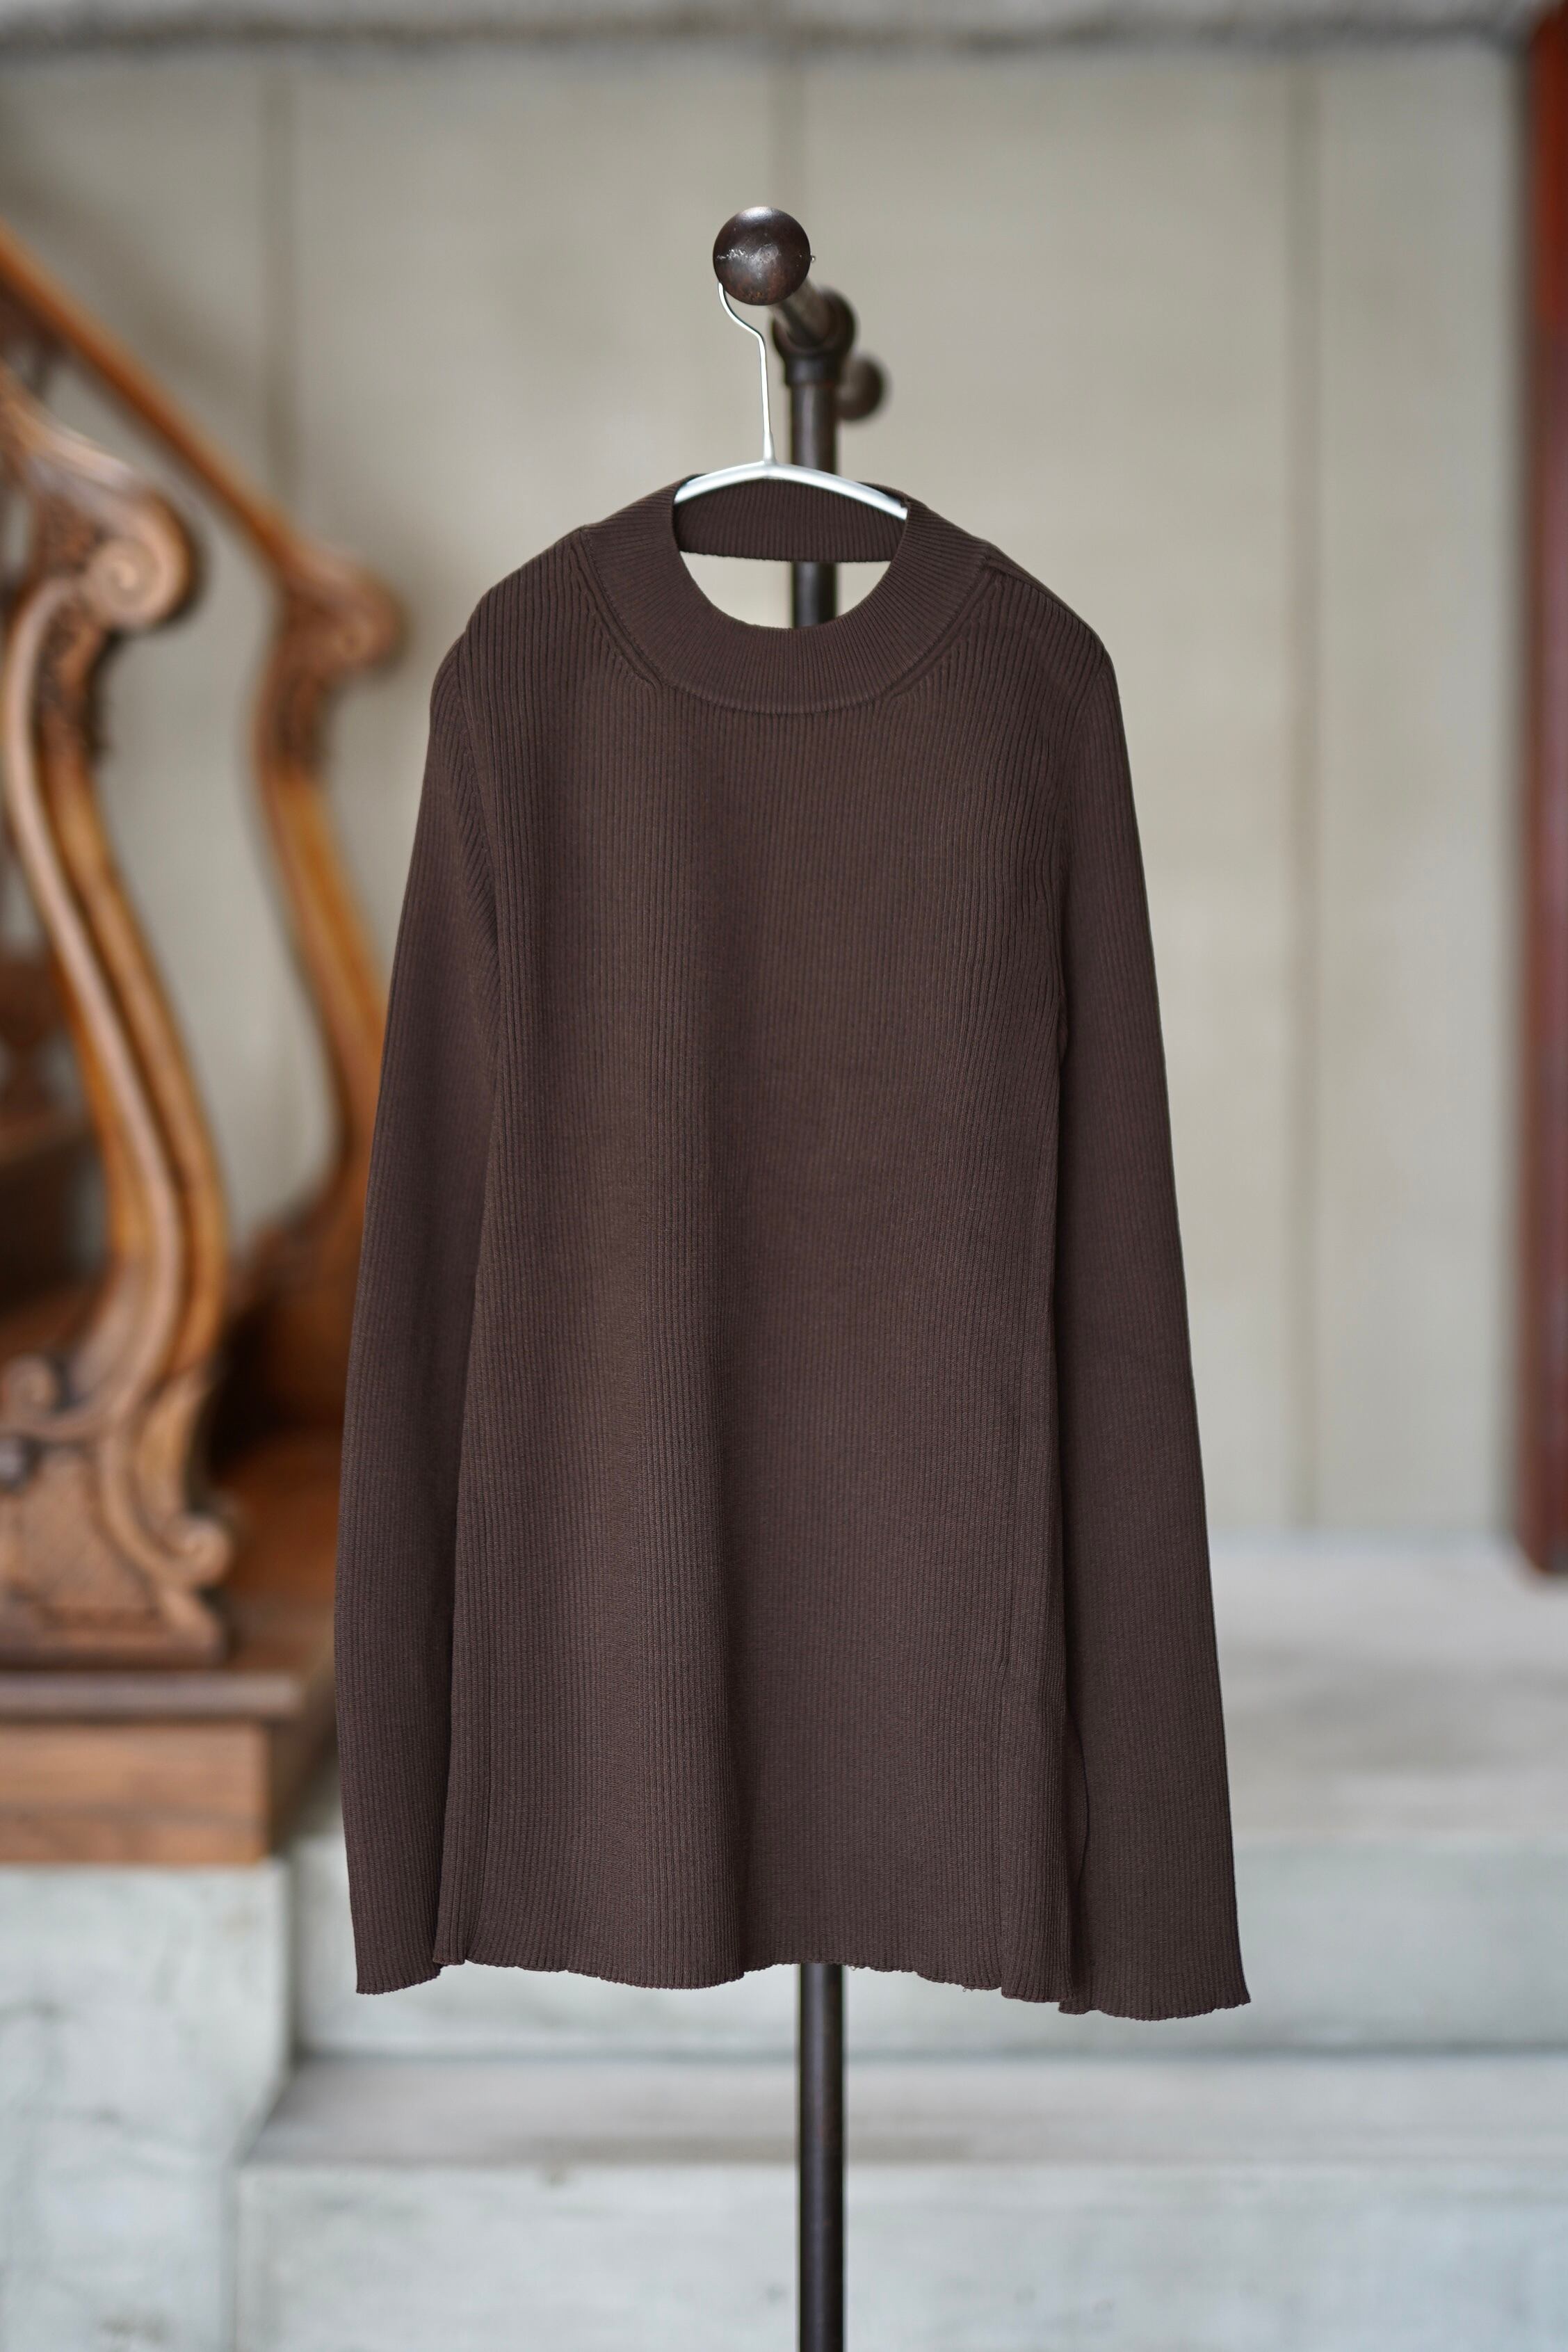 irrot イロット Back Open Rib Knit Brown